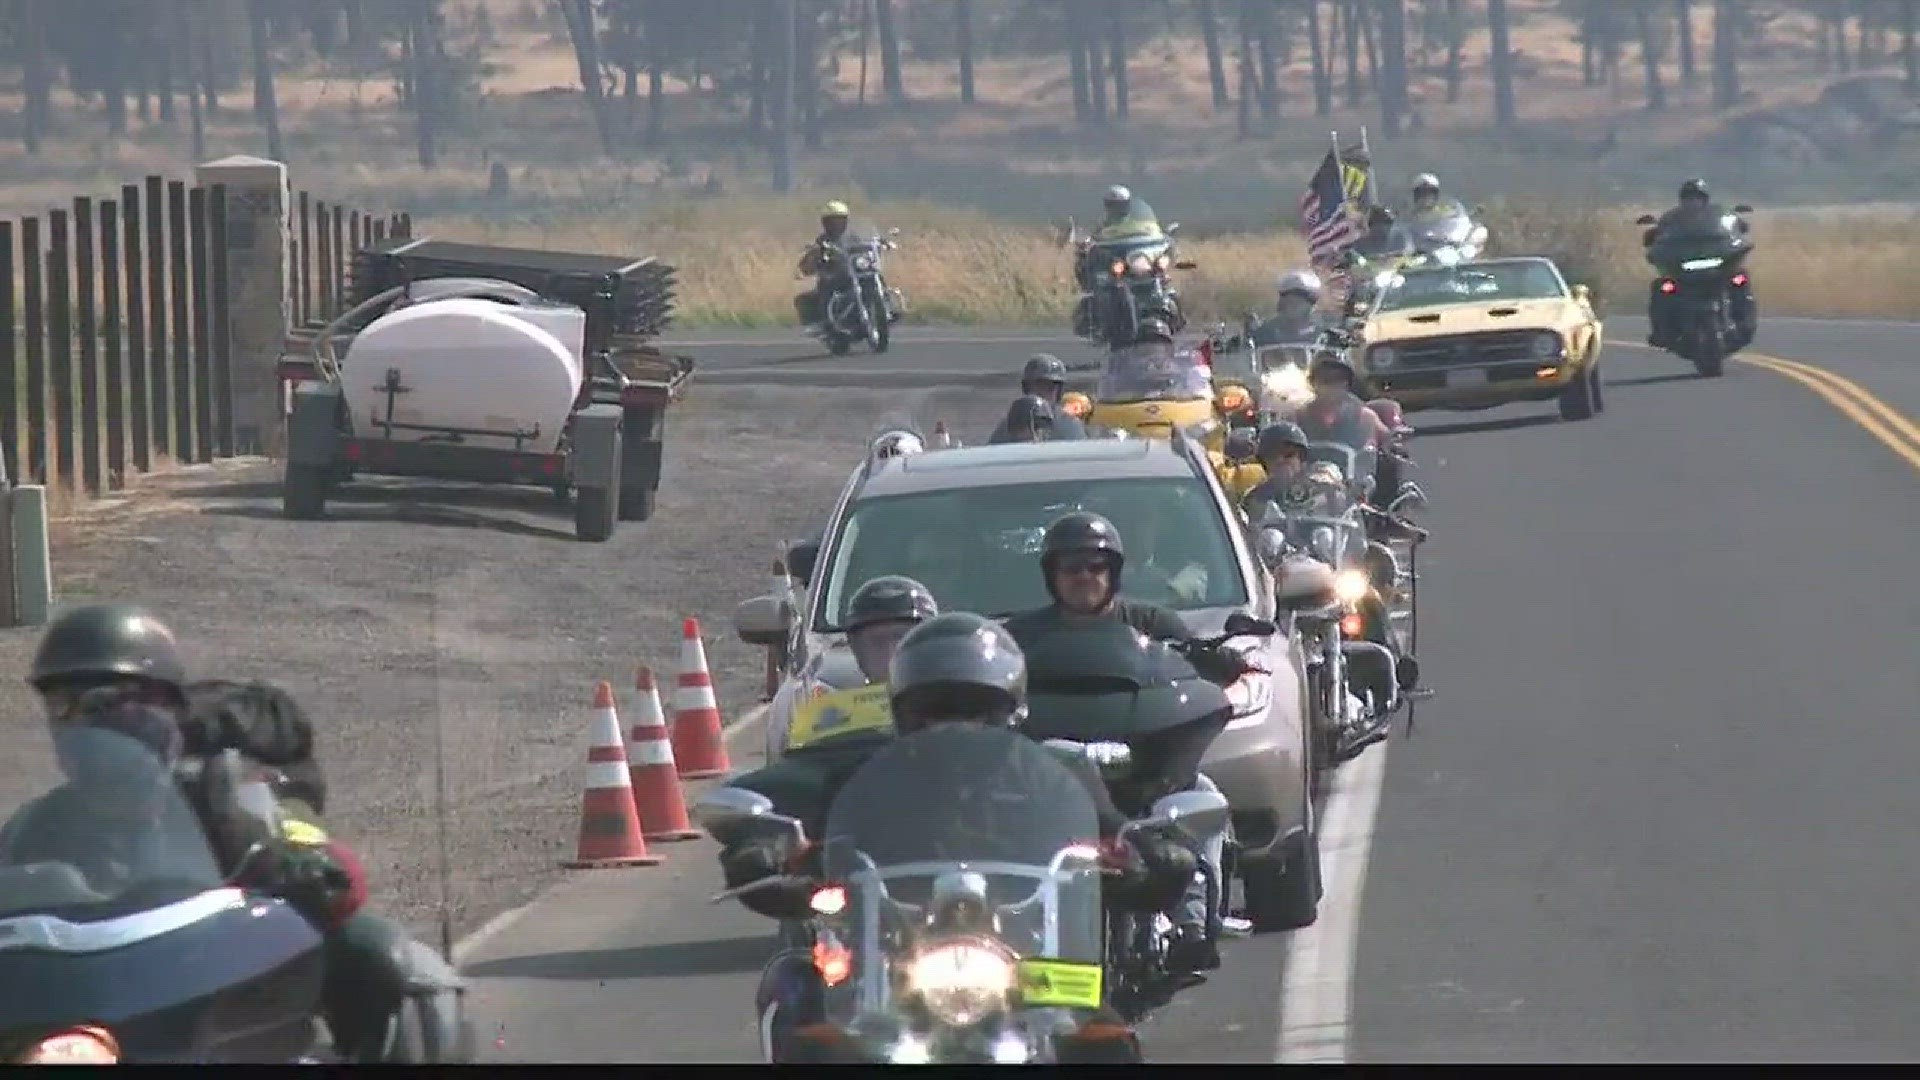 75 motorcycles passed through the gates of the Washington State Cemetery. They were carrying the remains of unclaimed veterans from around the state.